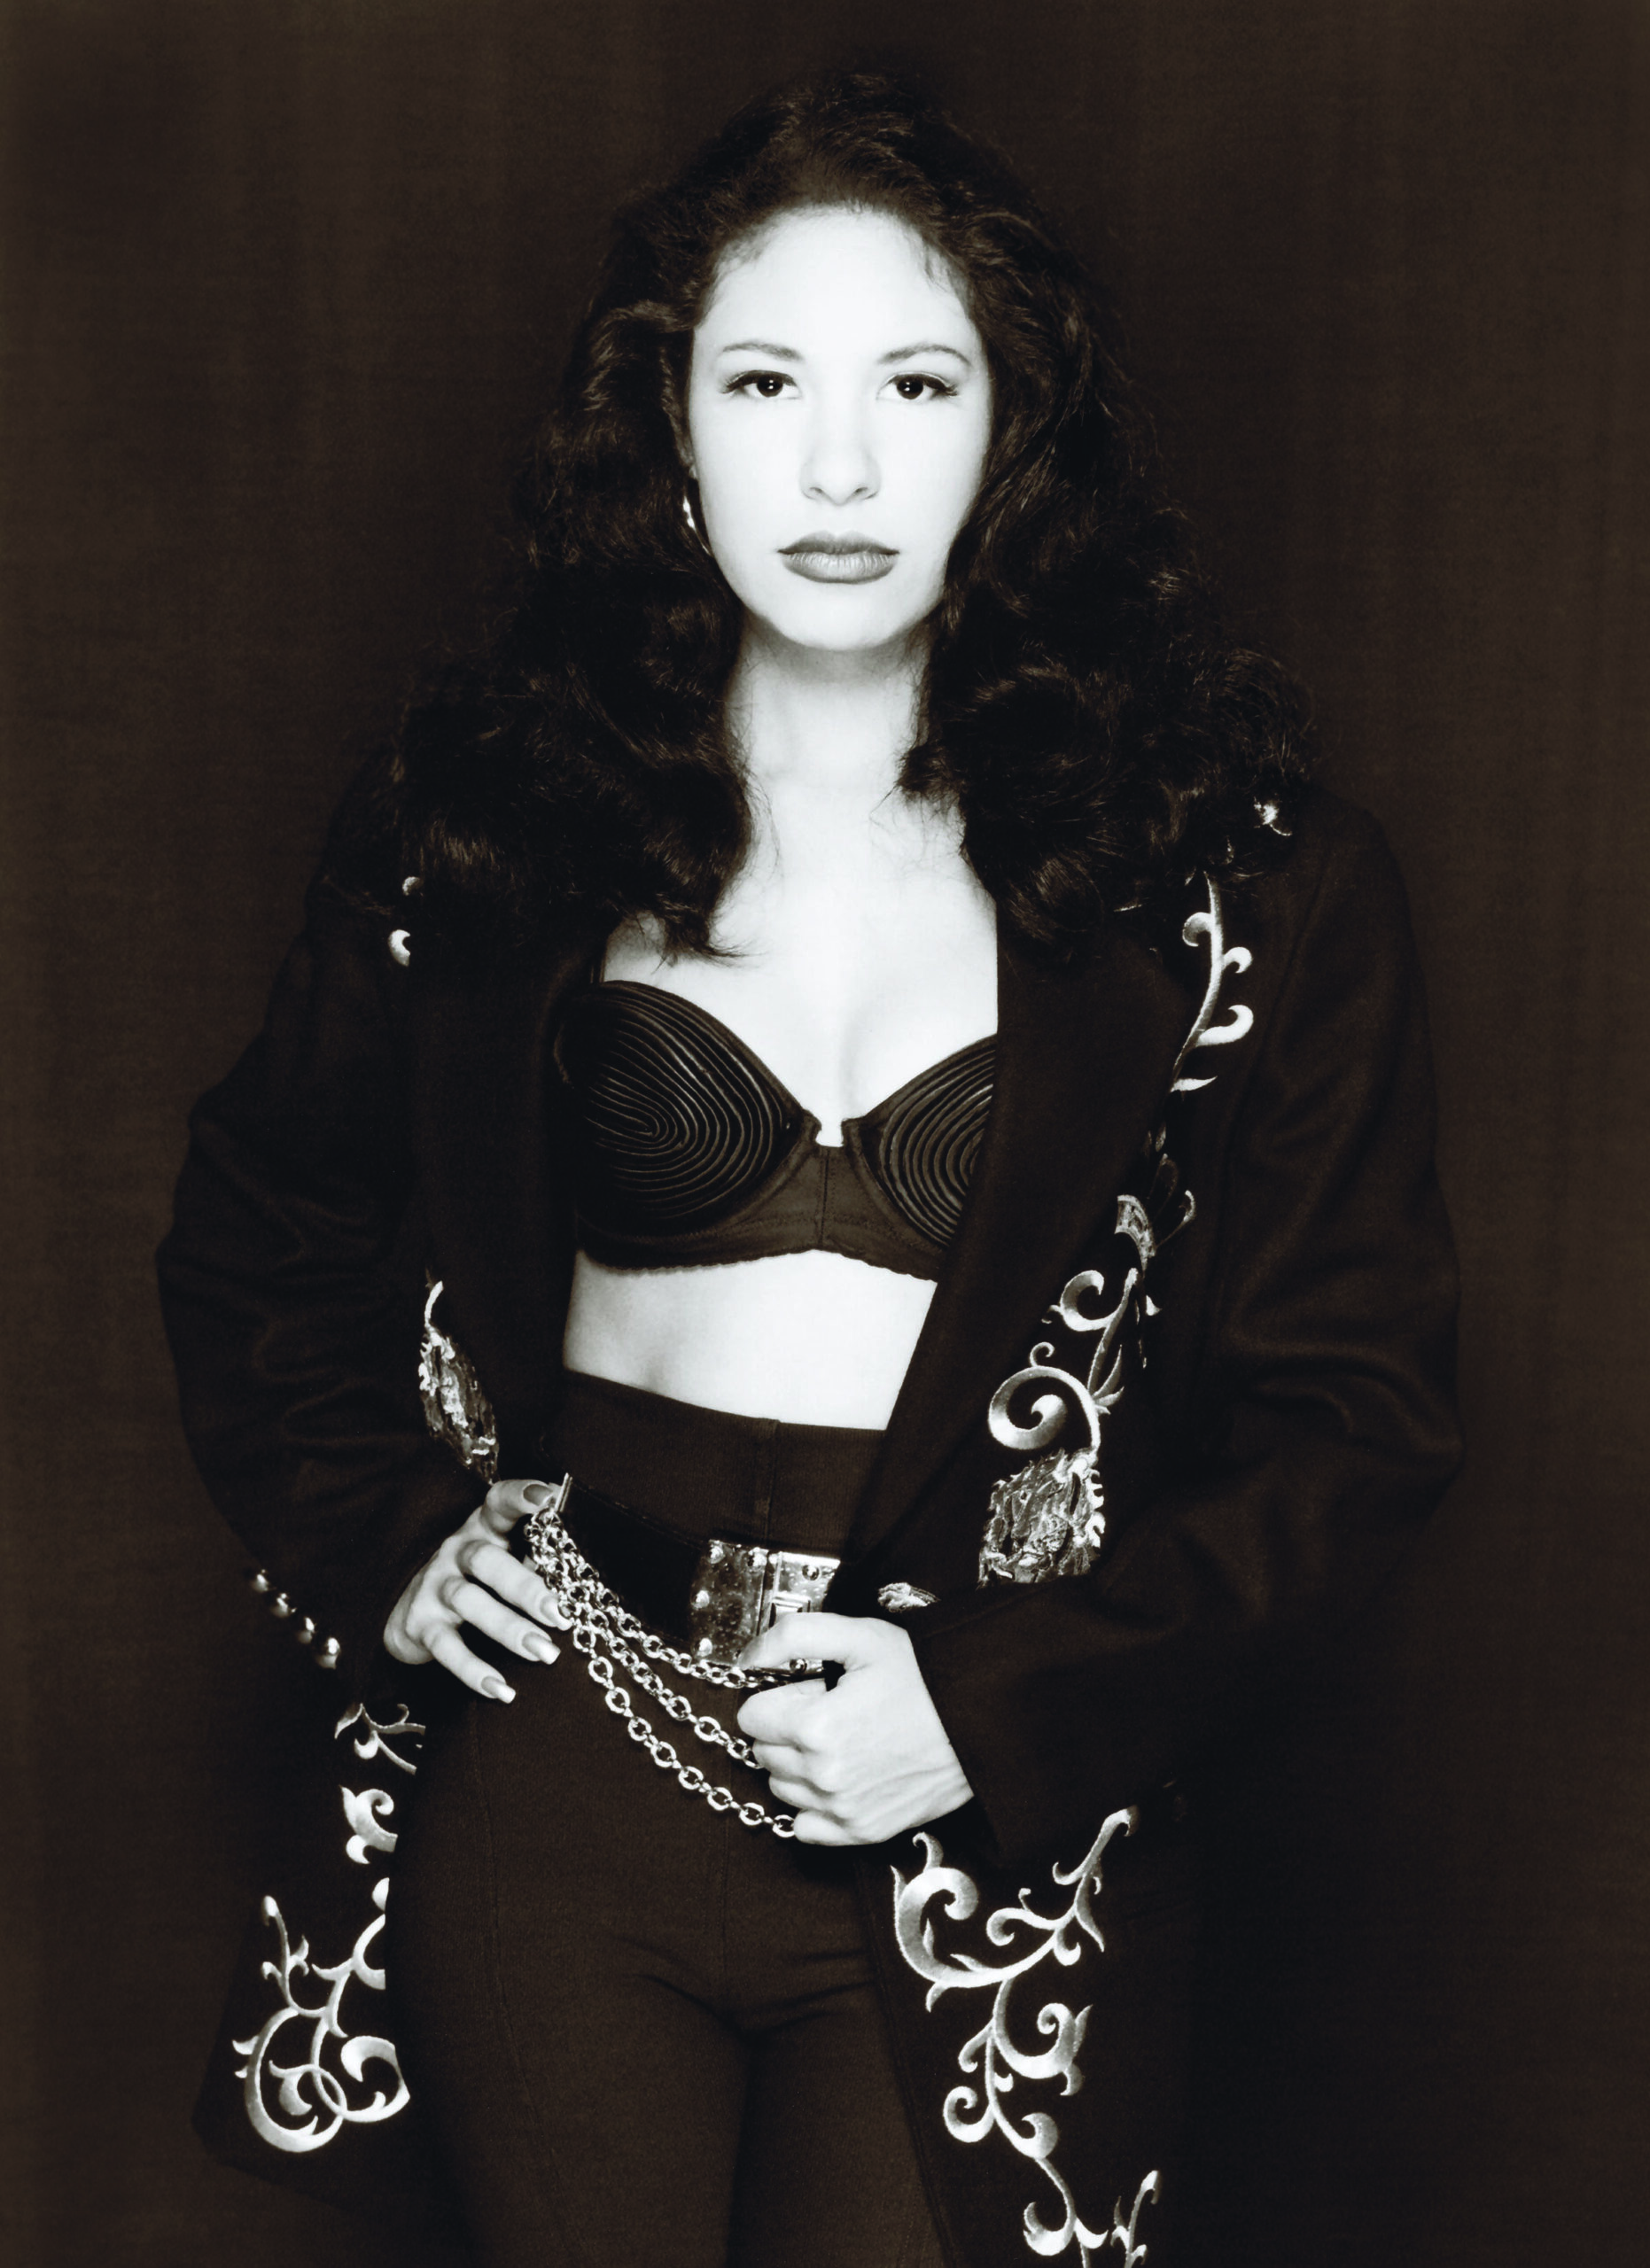 Selena, photographed in 1993 by Al Rendon